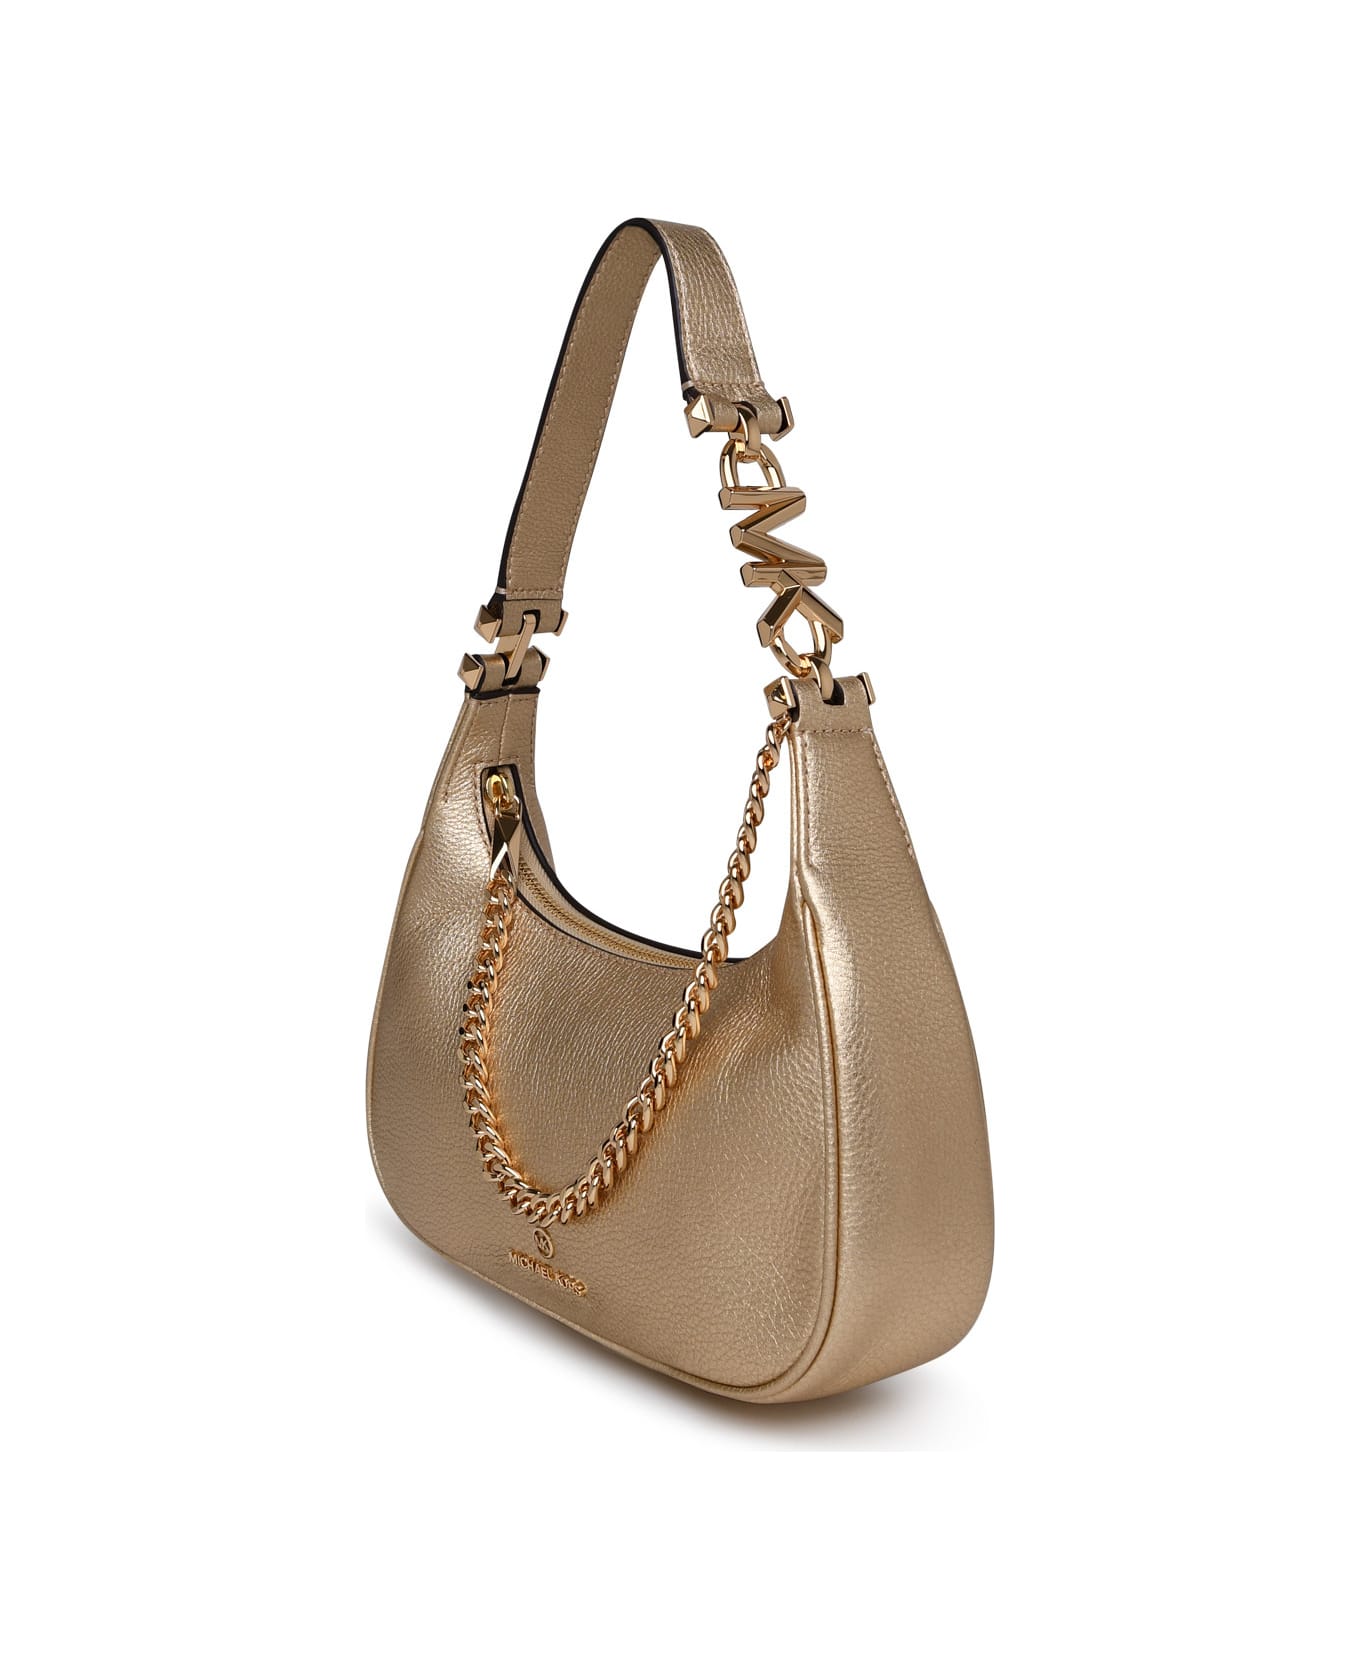 Michael Kors Piper Leather Bag - Gold